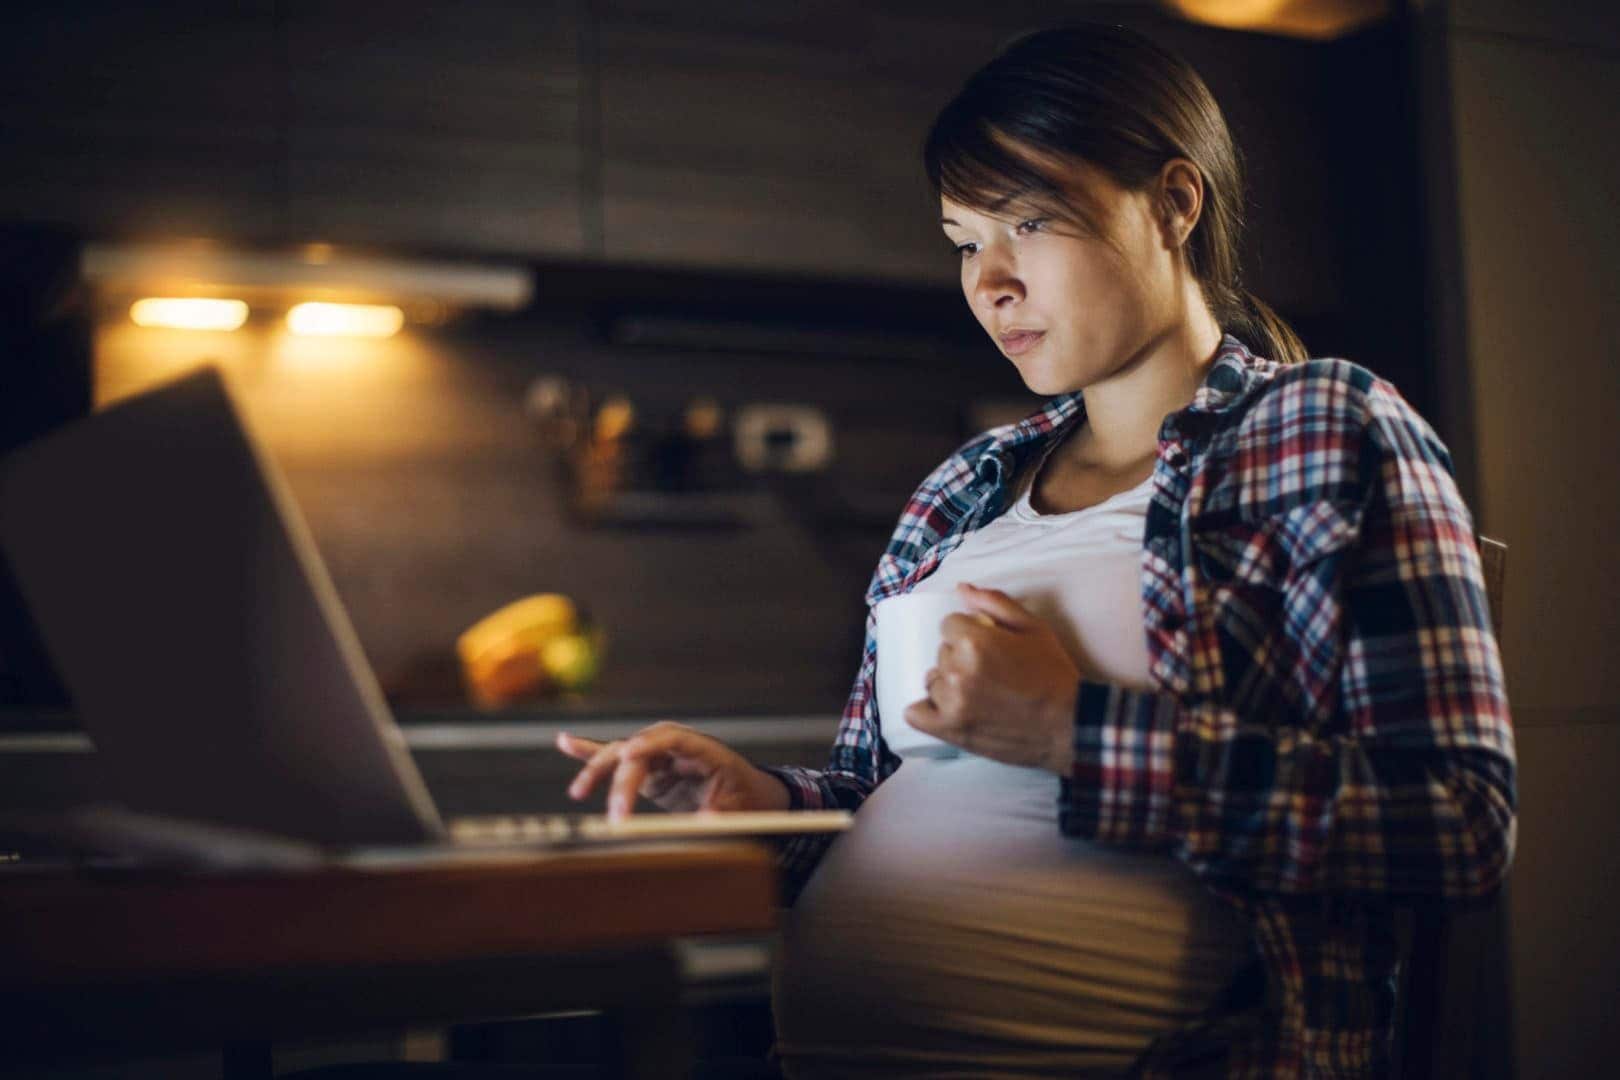 Pregnancy amplified my workaholic tendencies, but here’s how I learned to chill